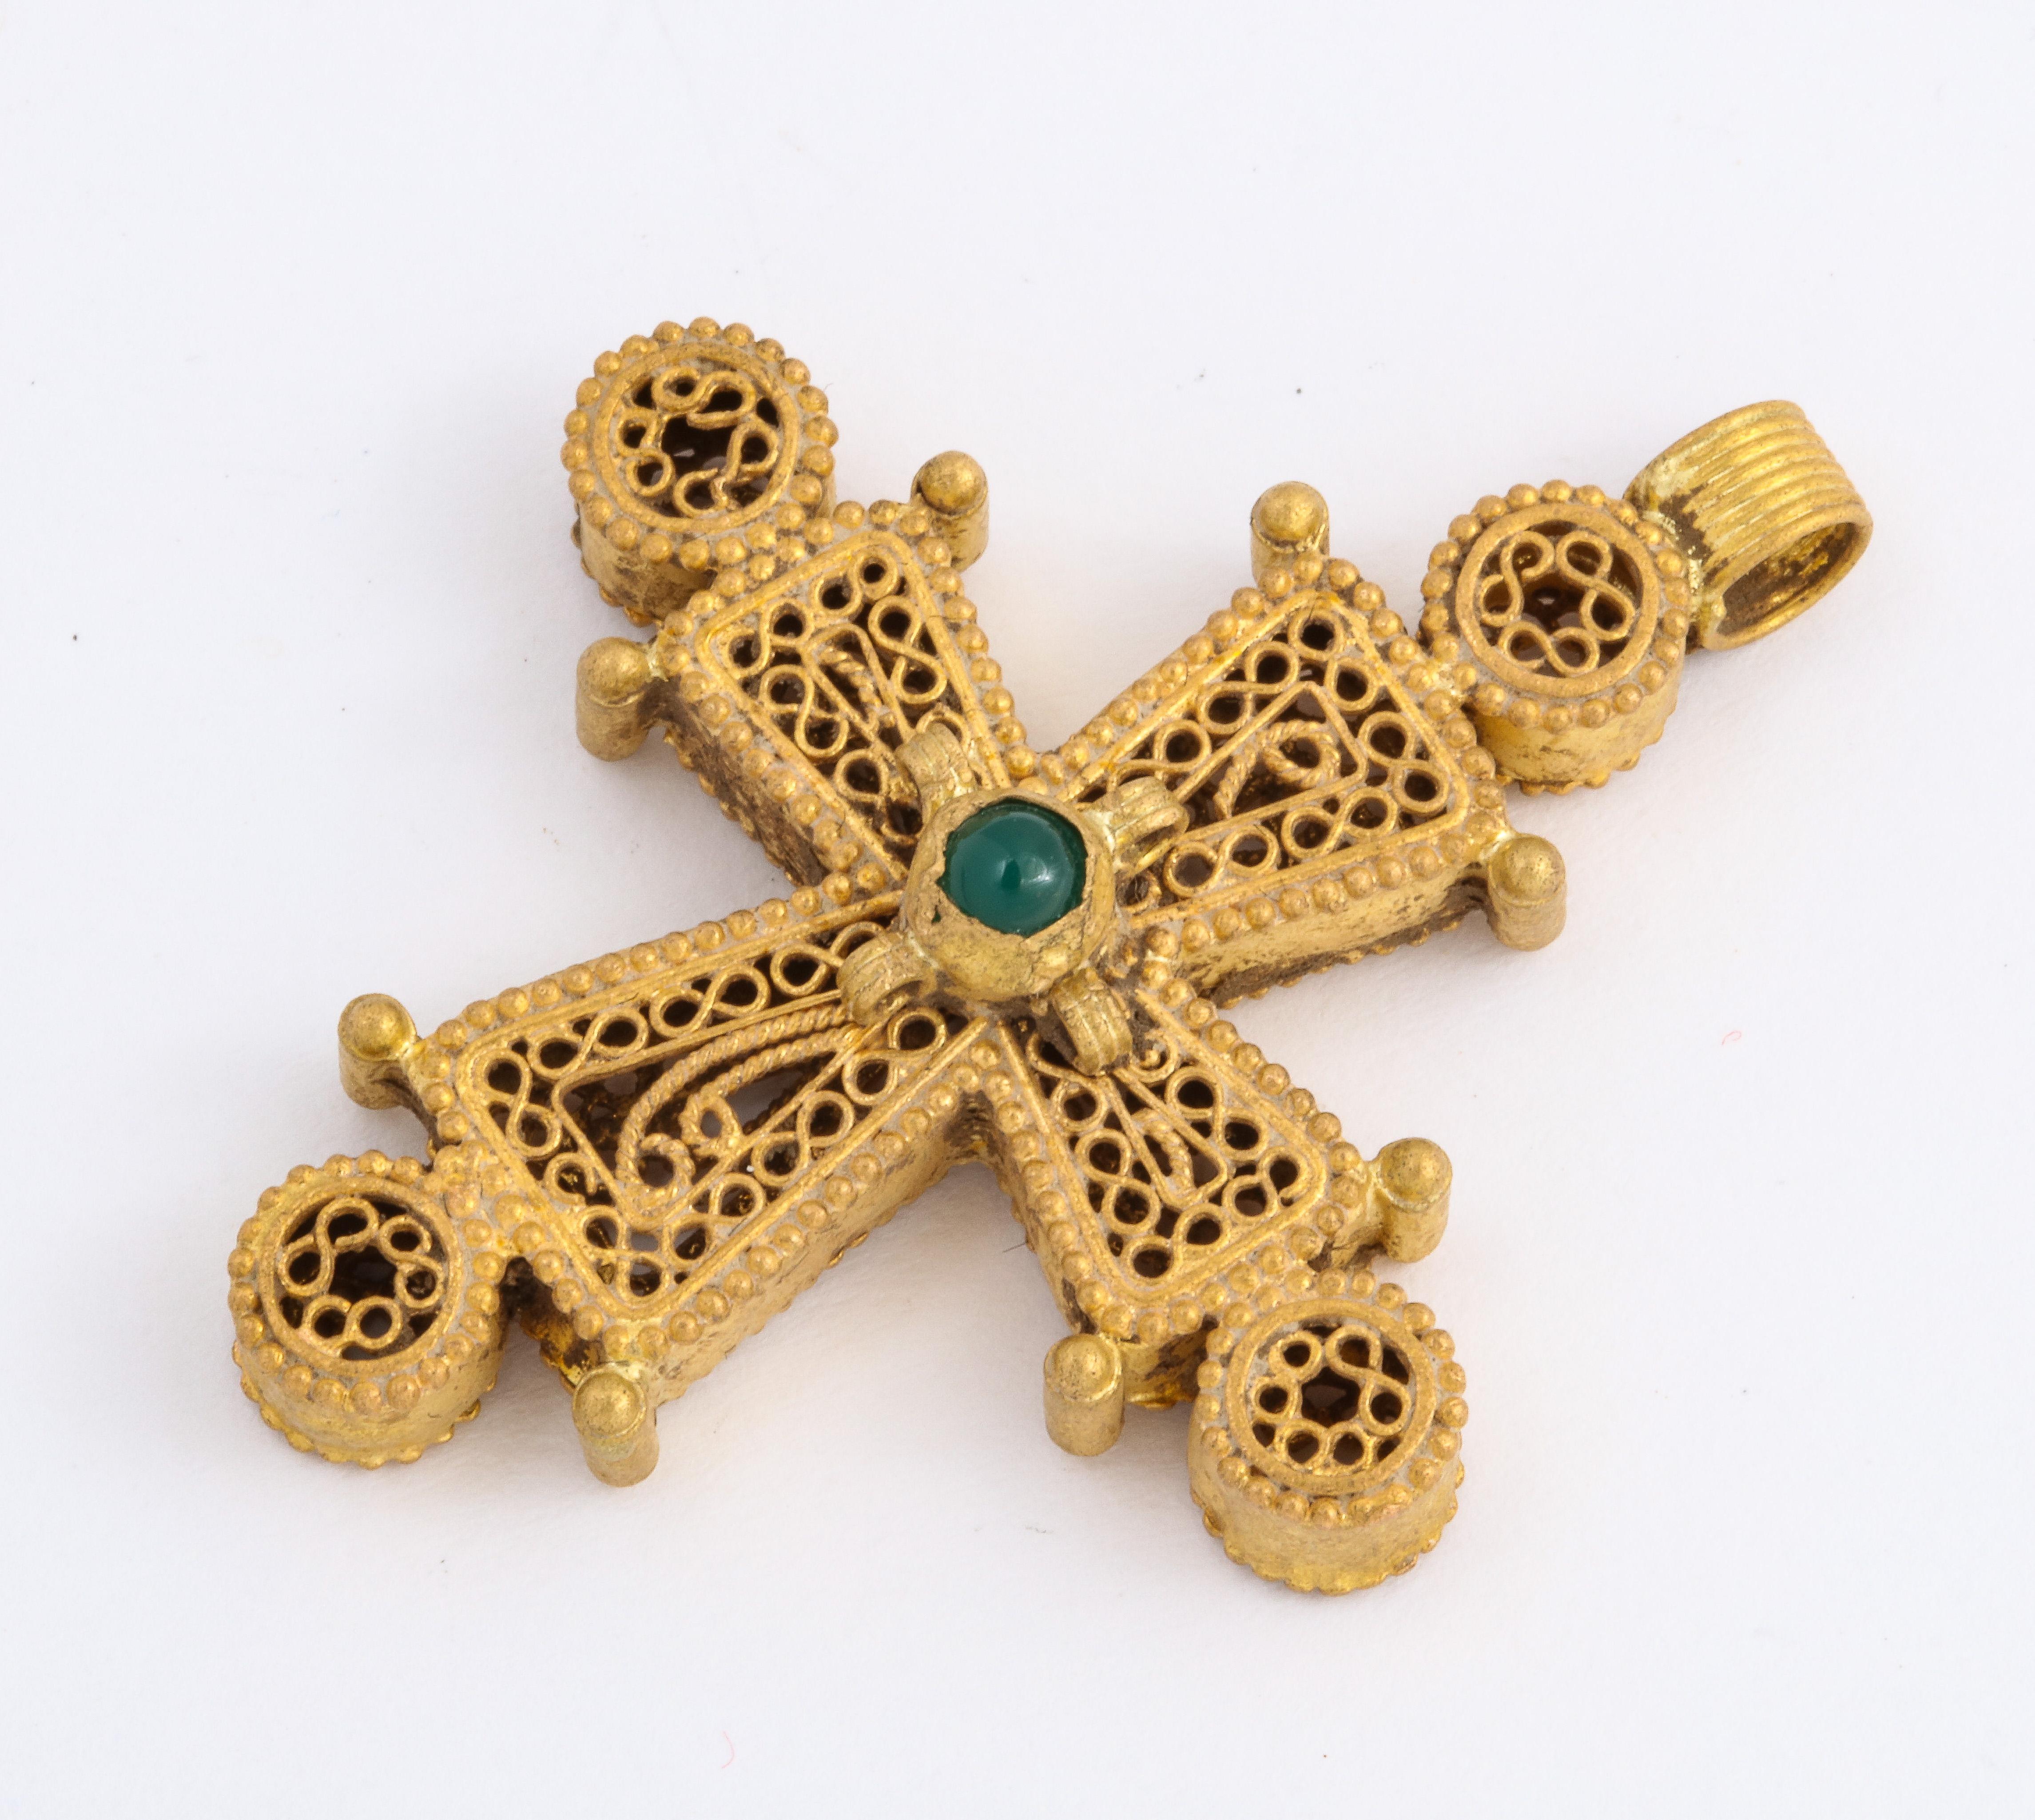 A high karat rare gold Byzantine cross with beautiful open work and circular scroll work is centered by an emerald of the same period. Tiny baubles of gold are placed at each cross end and round the gemstone. The cross was made approximately one